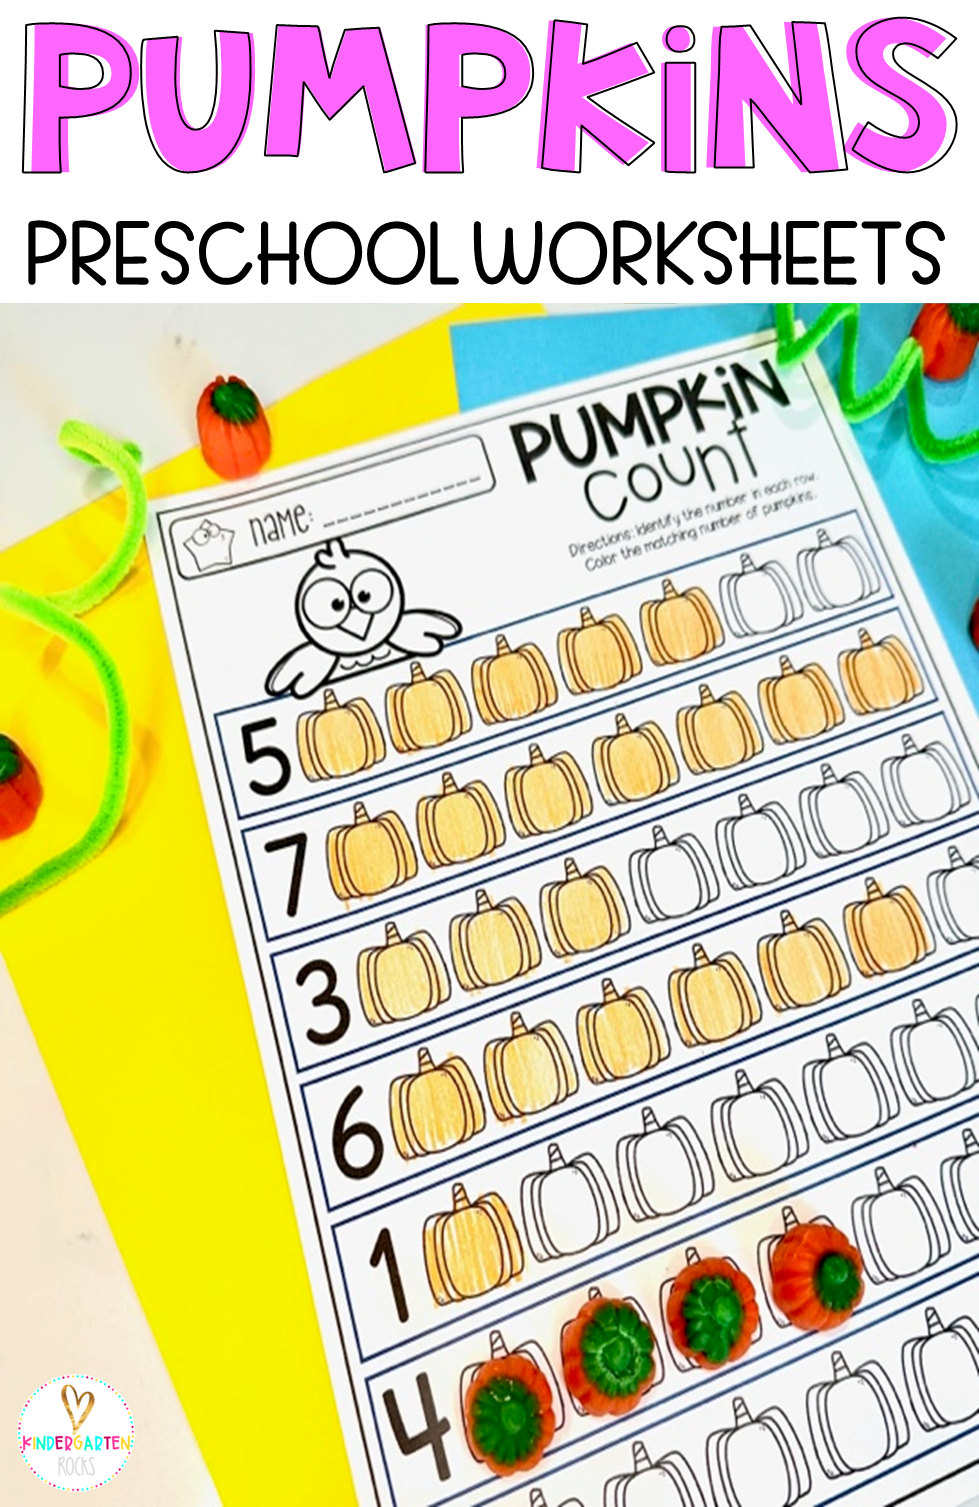 Pumpkin Math and Literacy Worksheets and Printables for Preschool is perfect for your preschool classroom. The boys and girls will identify the number and count the matching number of pumpkins.